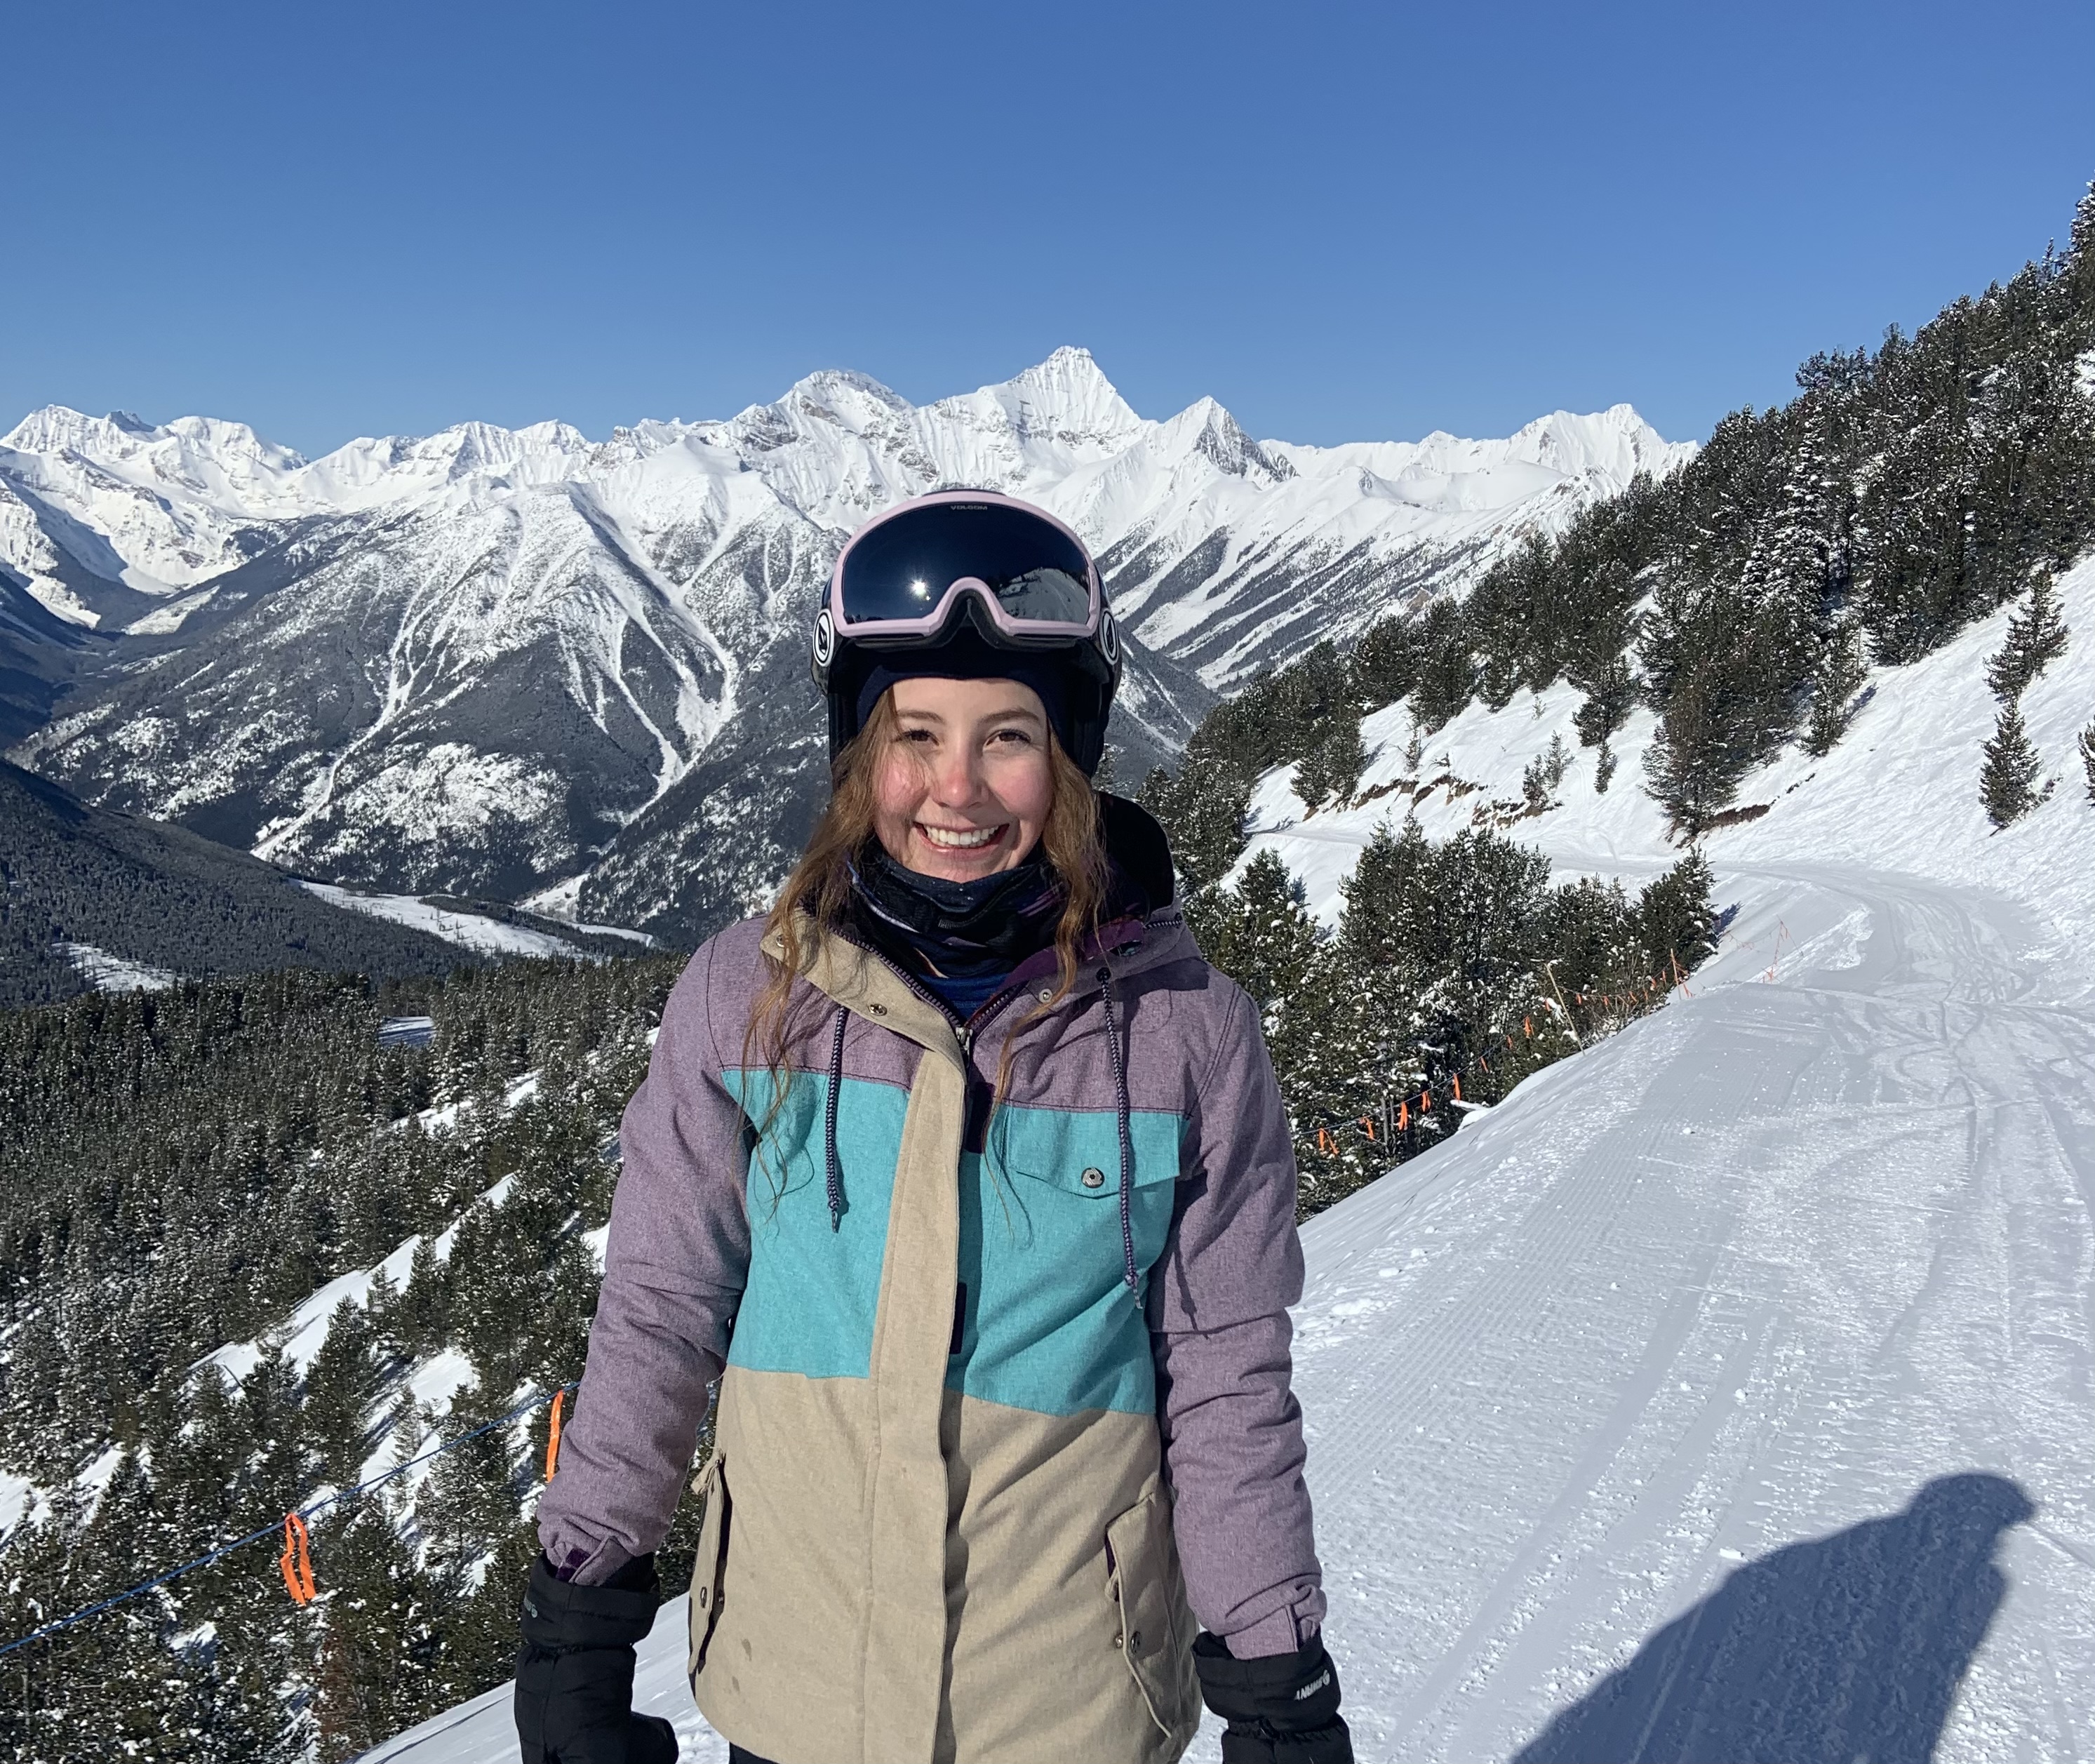 A smiling woman with long brown hair in a purple, grey and aqua winter jacket and ski goggles standing on a snowy mountain.